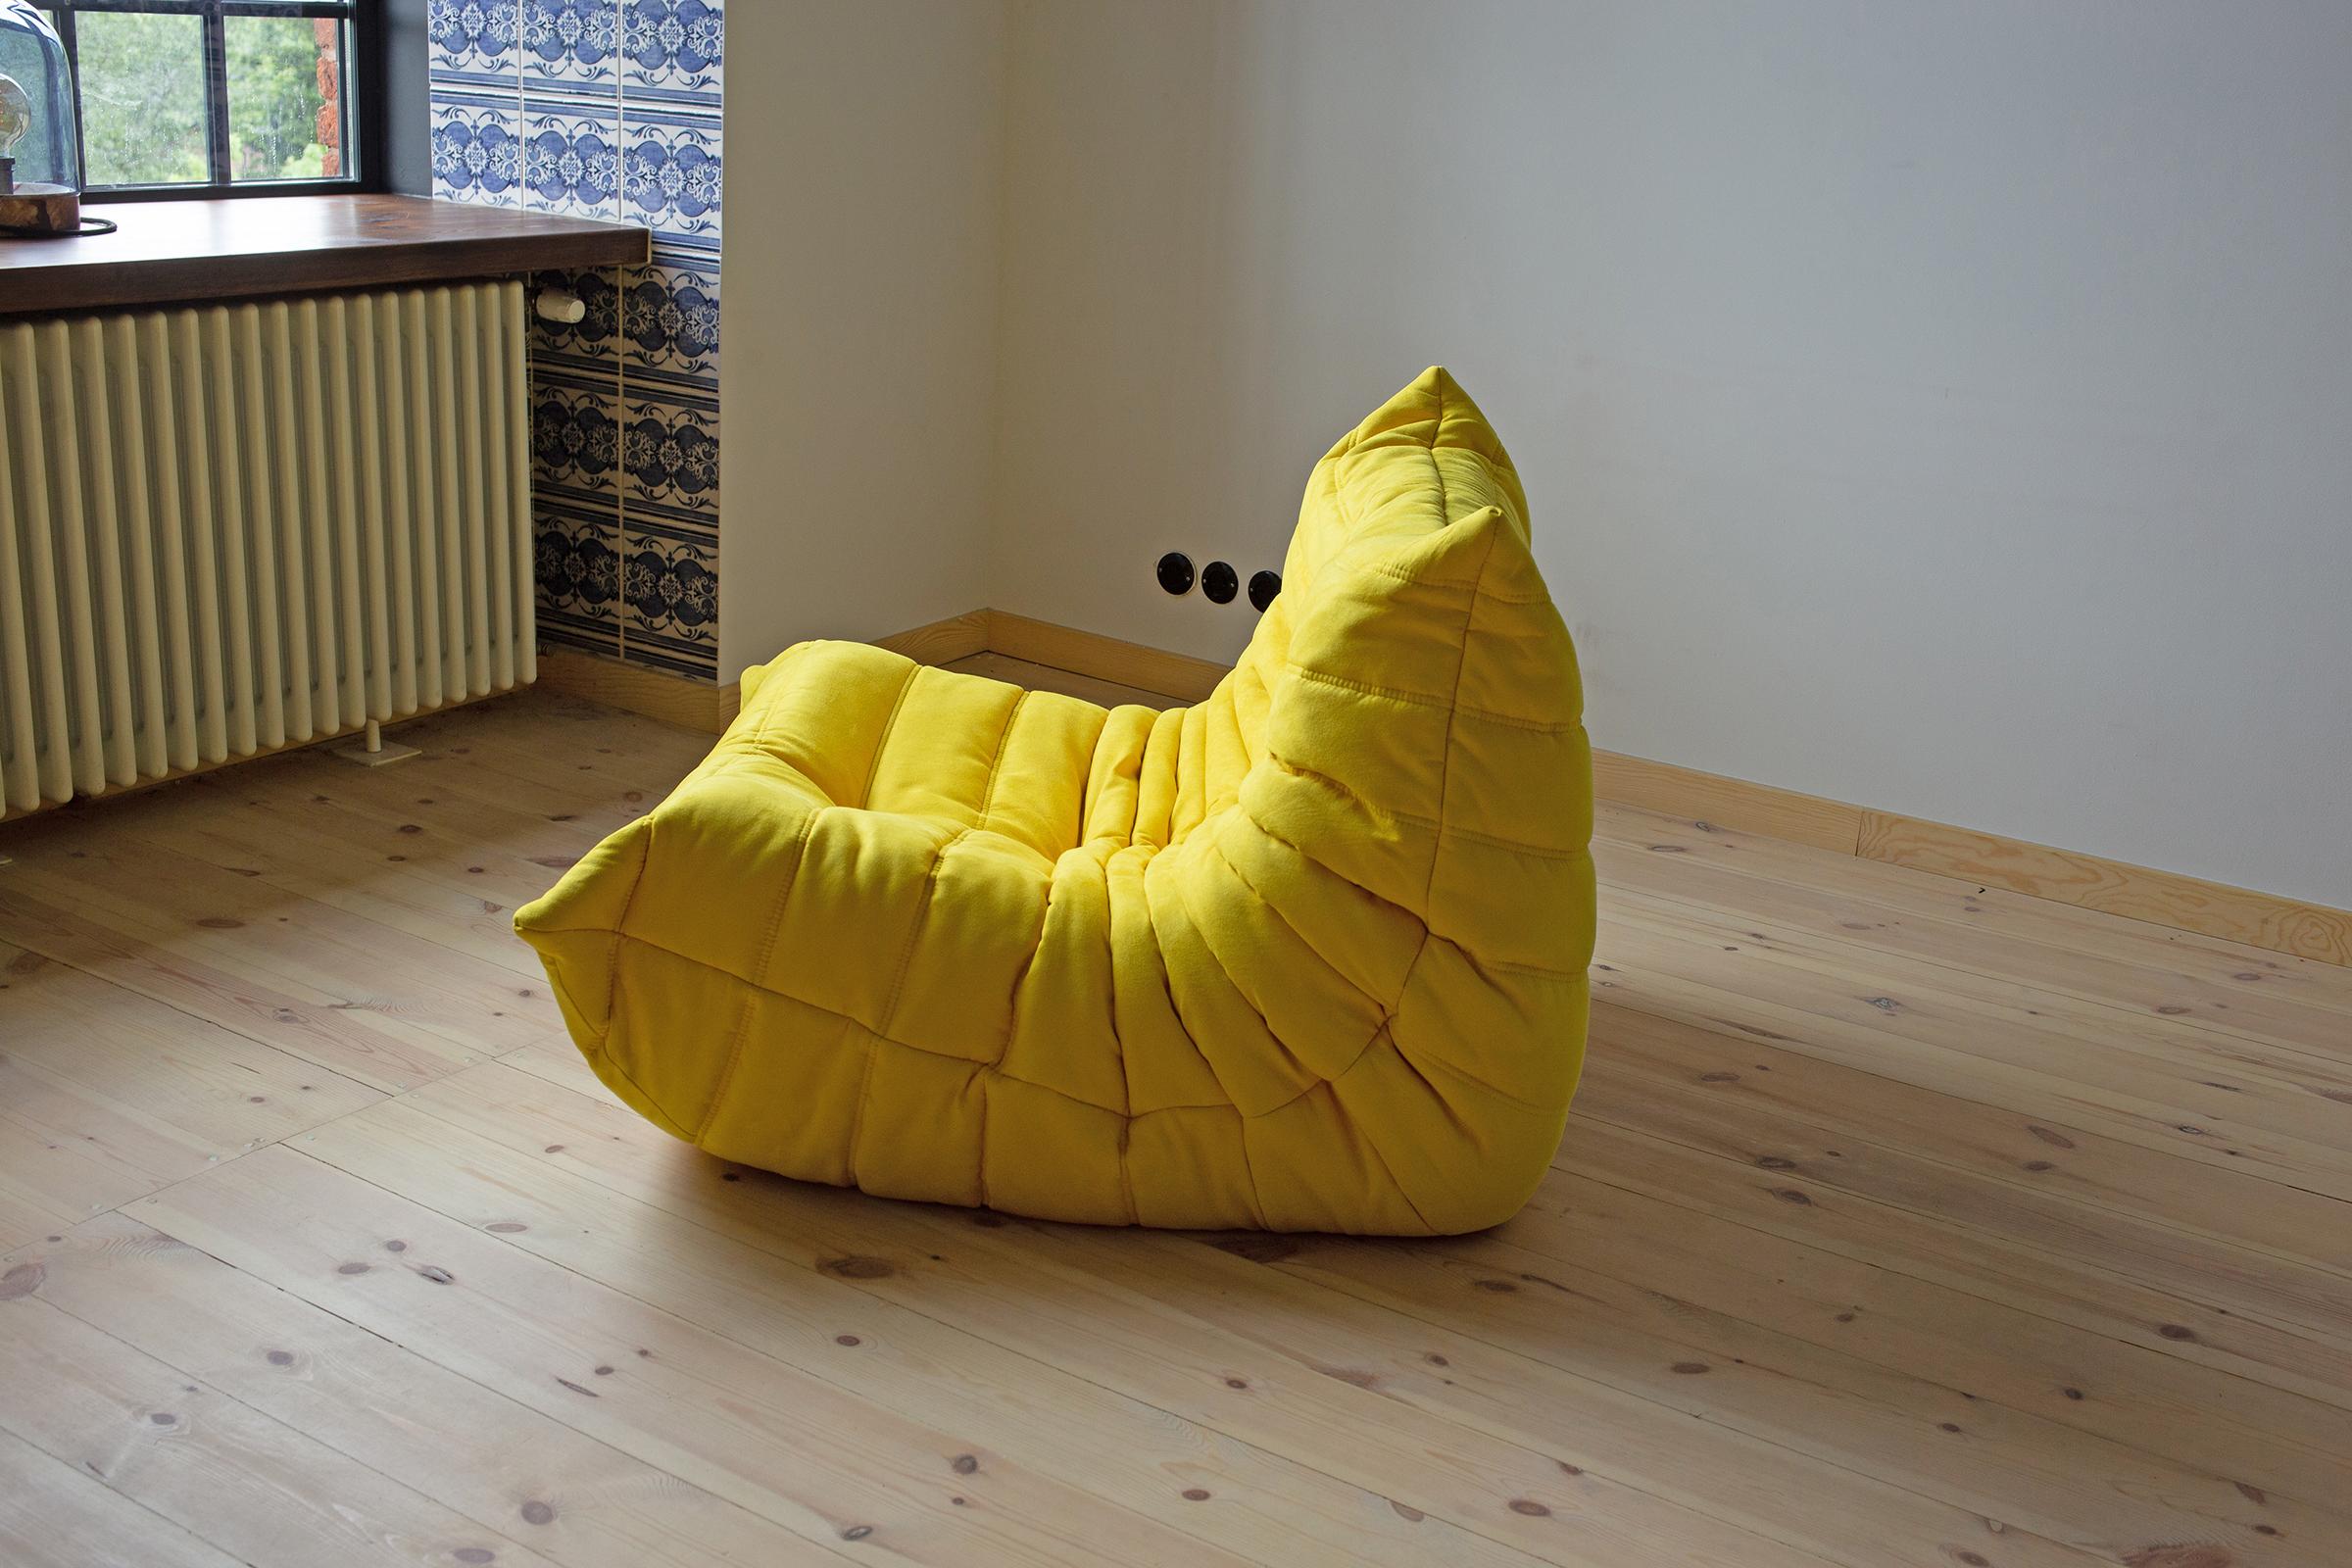 This Togo longue chair was designed by Michel Ducaroy in 1973 and was manufactured by Ligne Roset in France. It has been reupholstered in new yellow microfiber (87 x 102 x 70 cm). It has the original Ligne Roset logo and genuine Ligne Roset bottom.